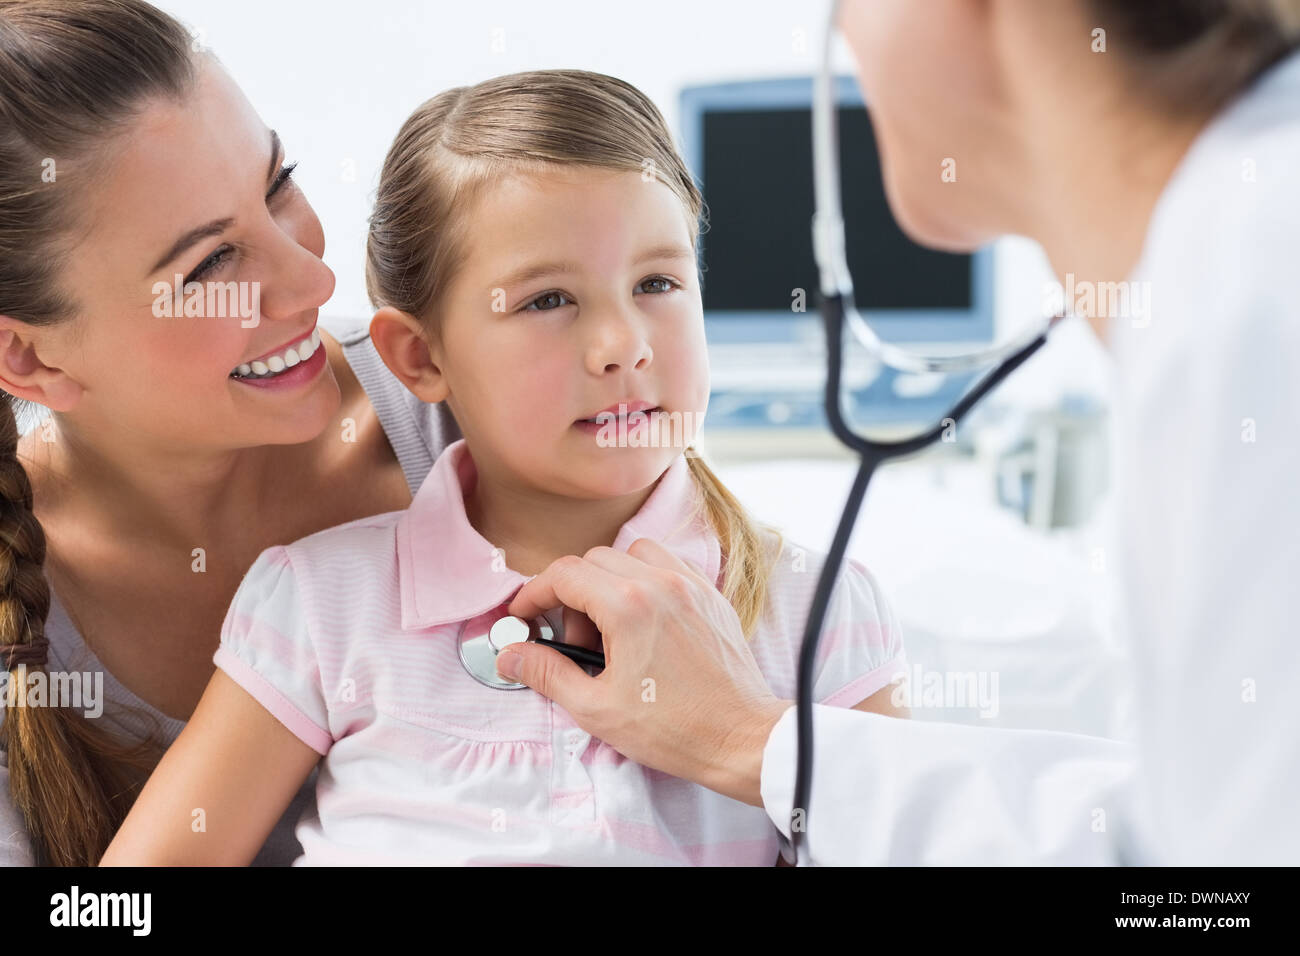 Girl being examined by female doctor Stock Photo